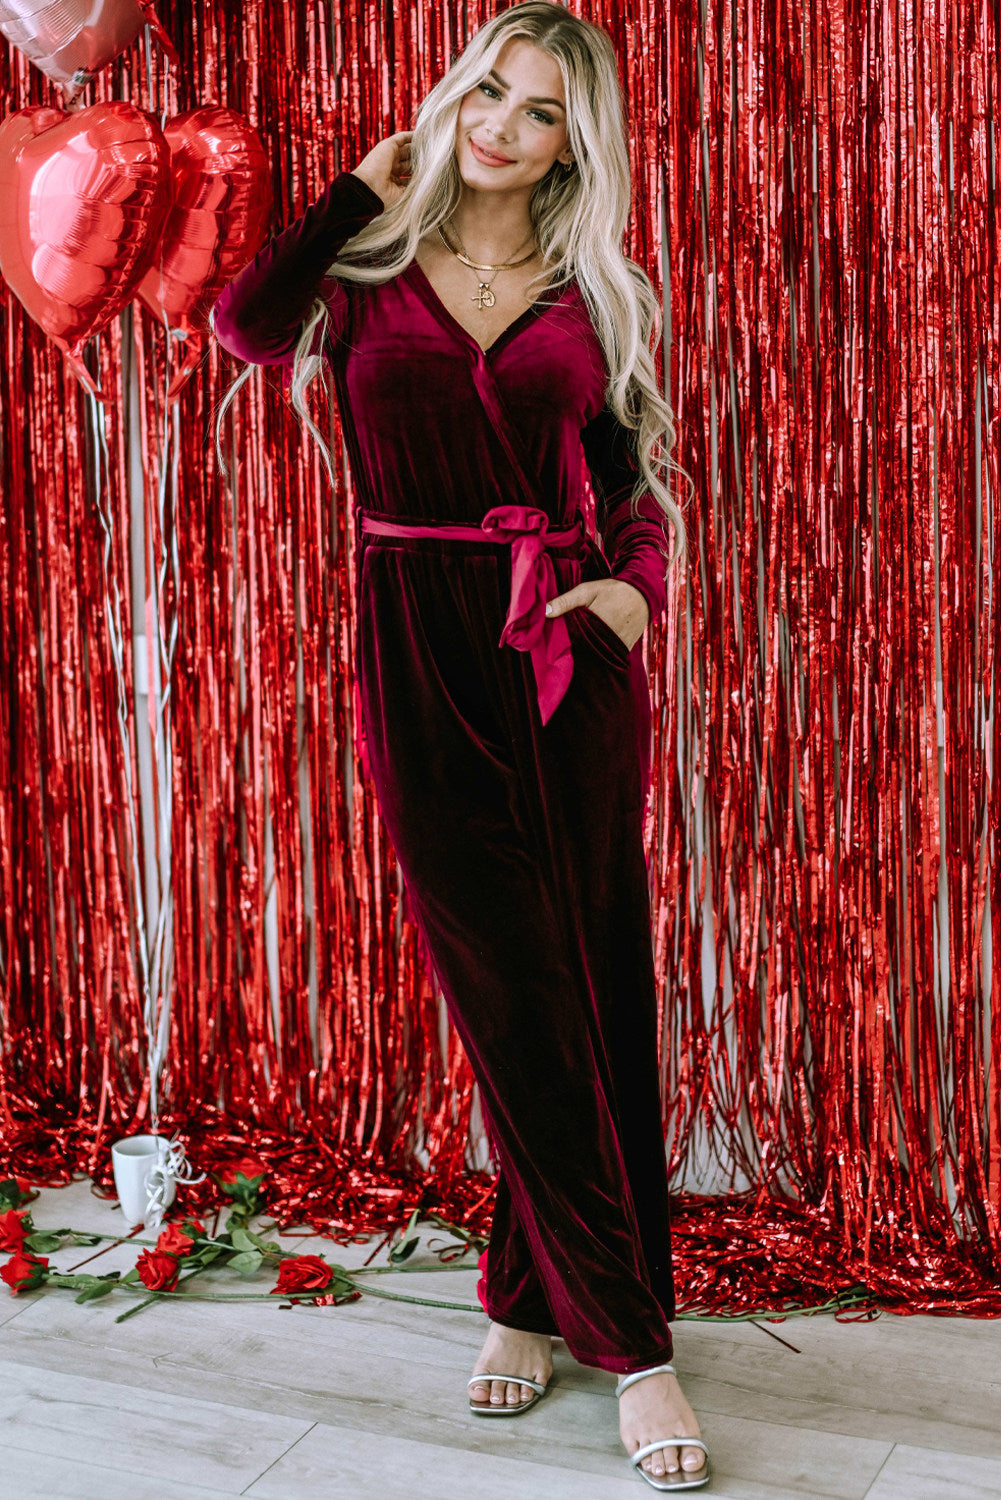 LC6412598-3-S, LC6412598-3-M, LC6412598-3-L, LC6412598-3-XL, Red Velvet Pocketed Cut out Back Wide Leg Jumpsuit